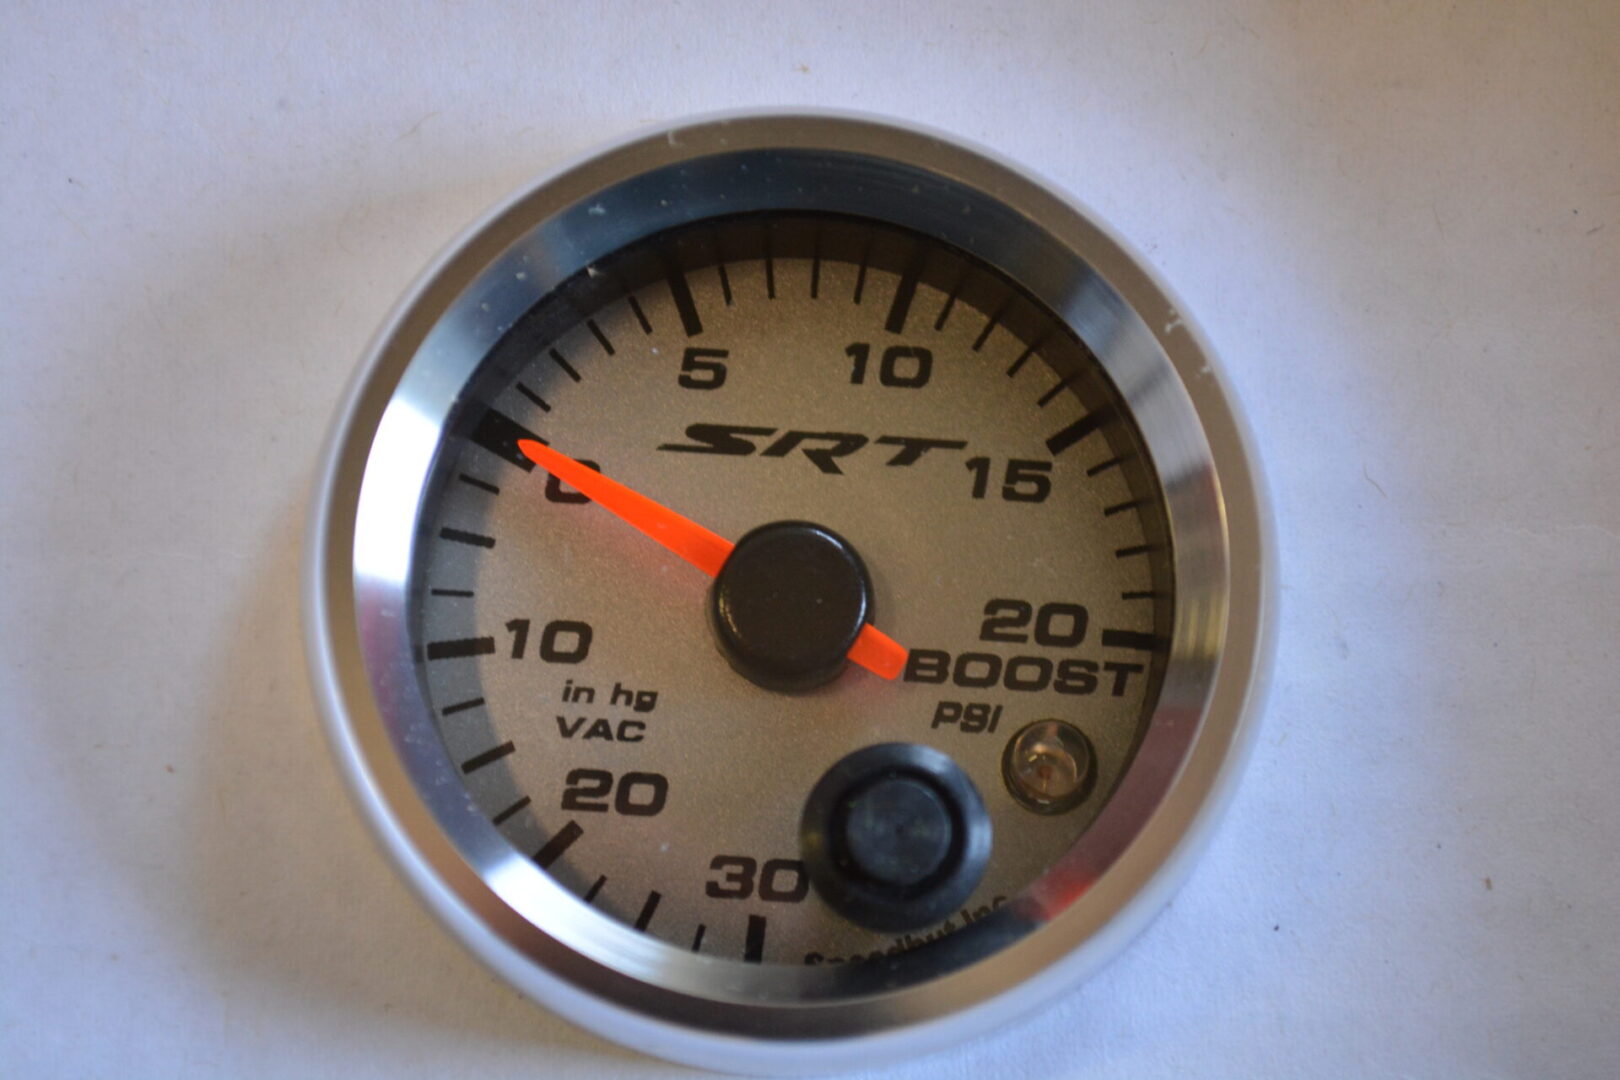 A white and silver gauge with orange needle.